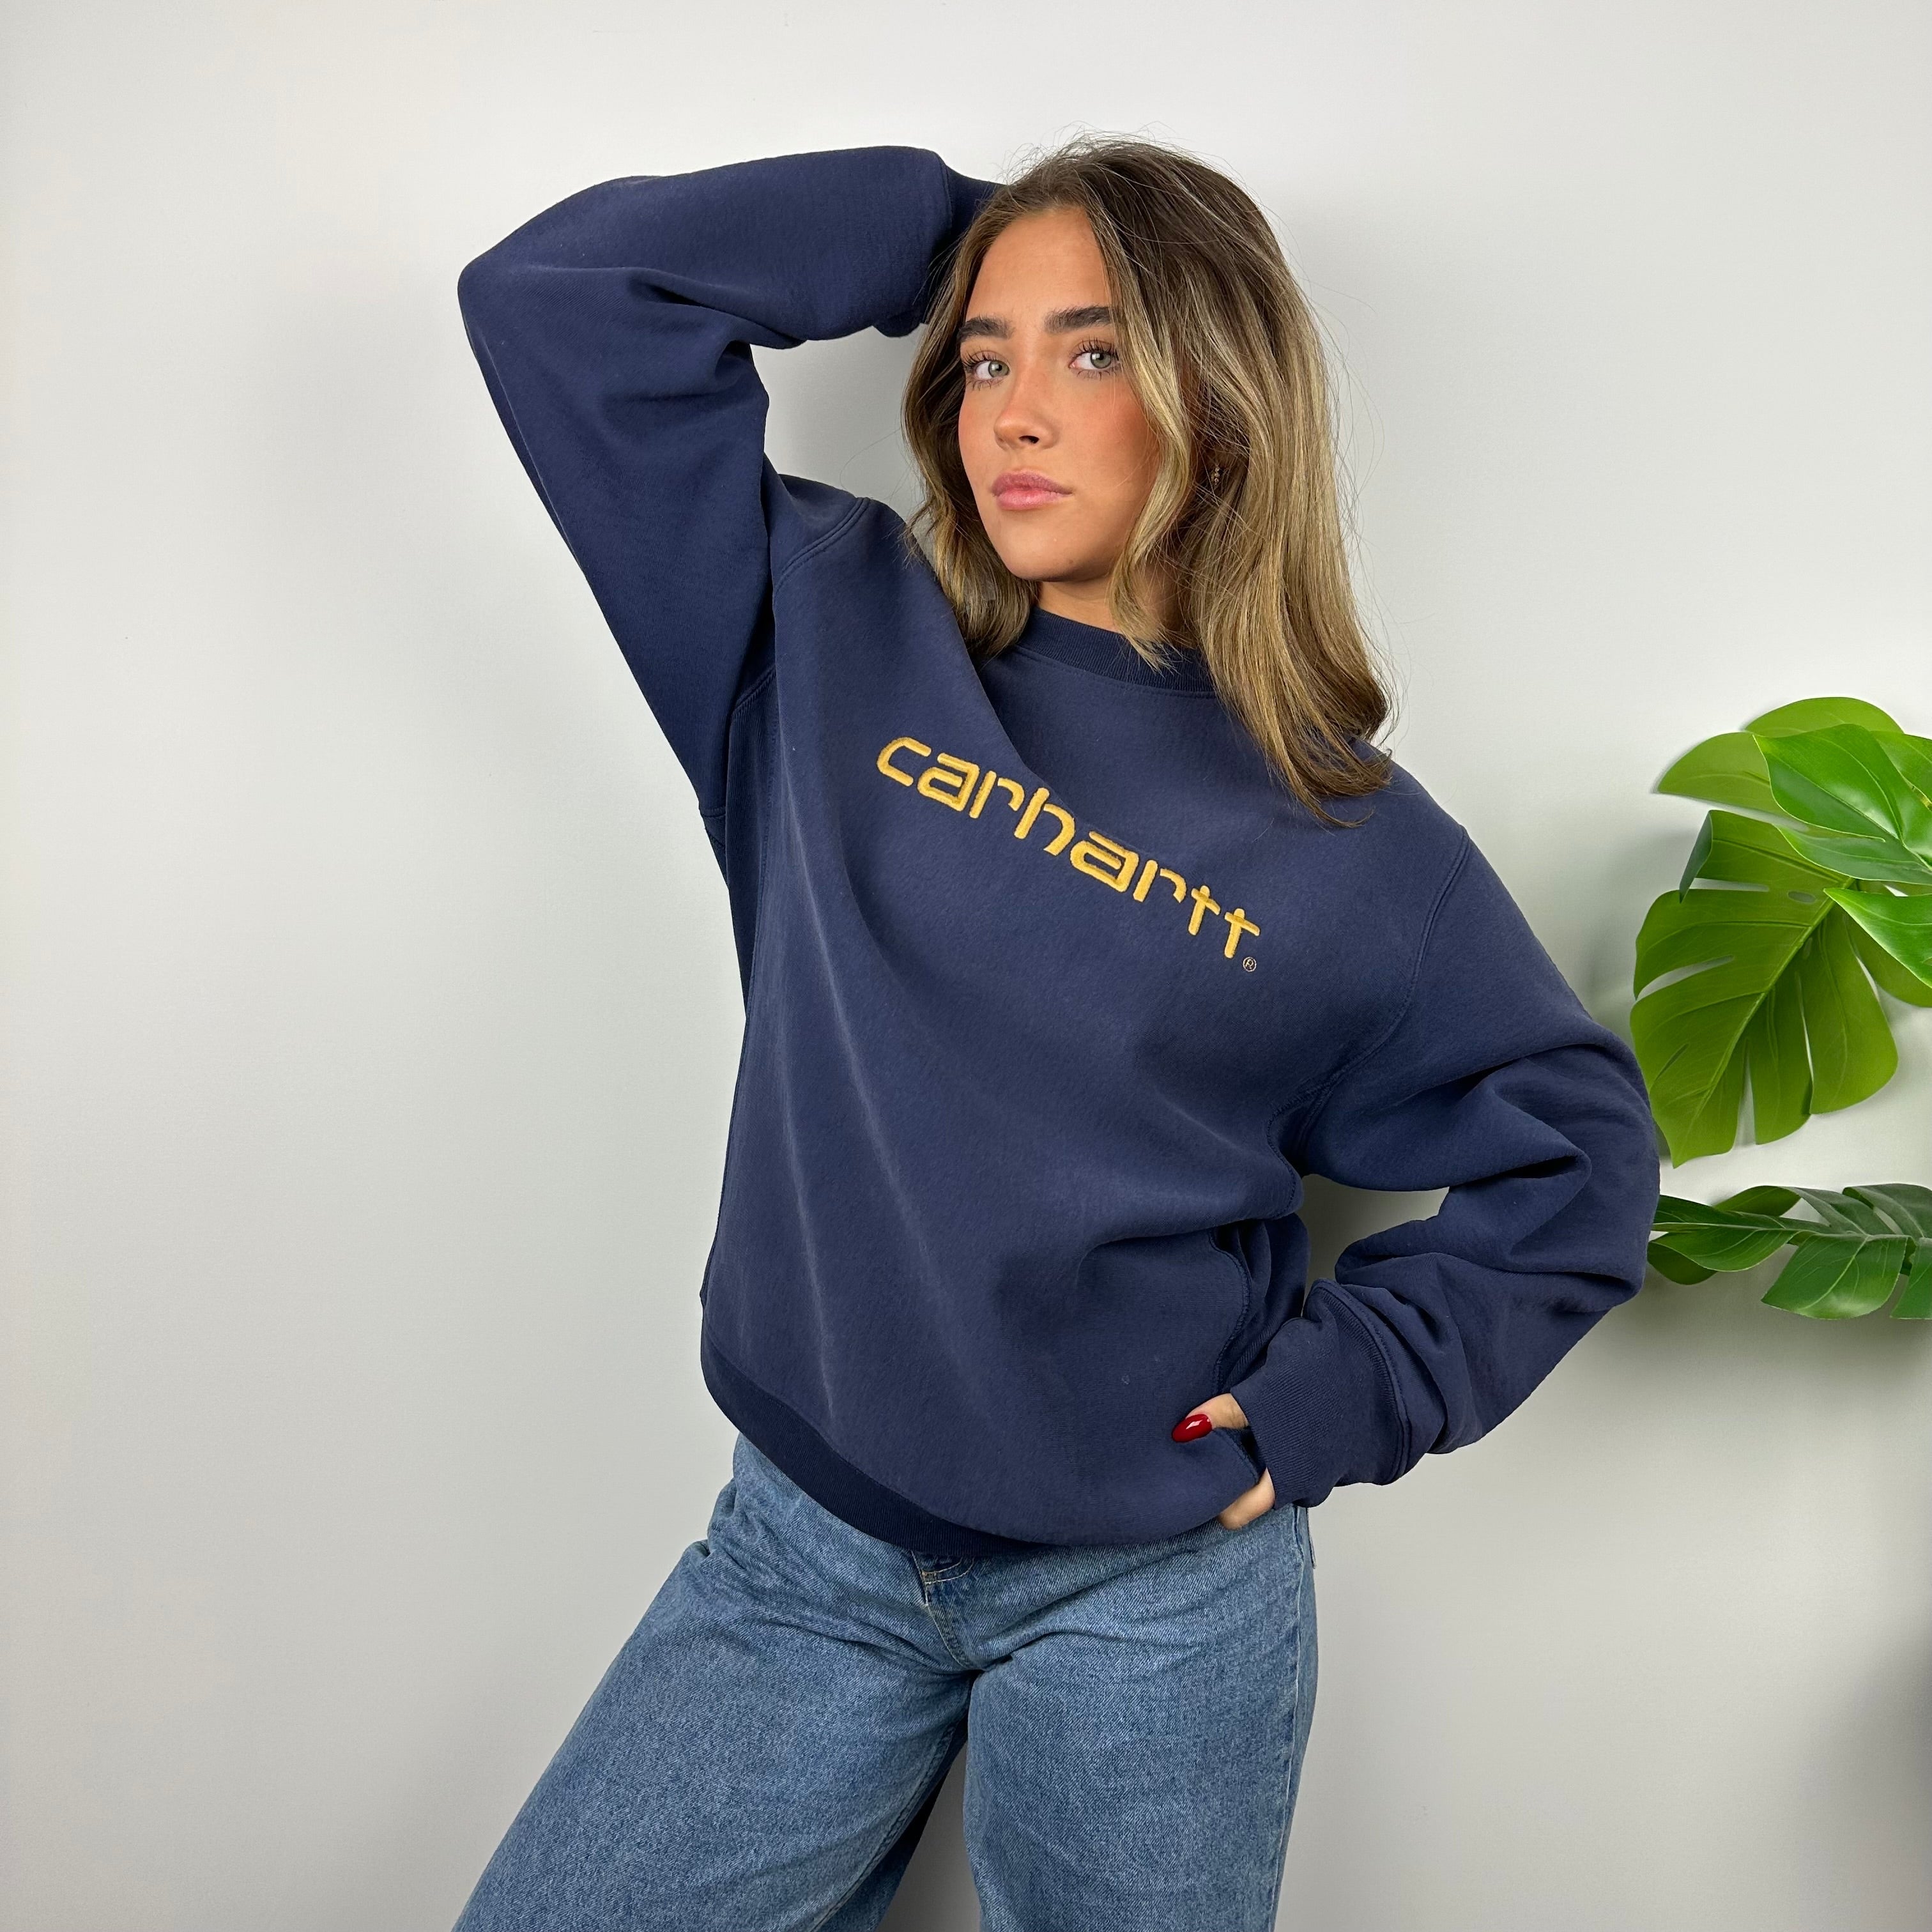 Carhartt Navy Embroidered Spell Out Sweatshirt (L)